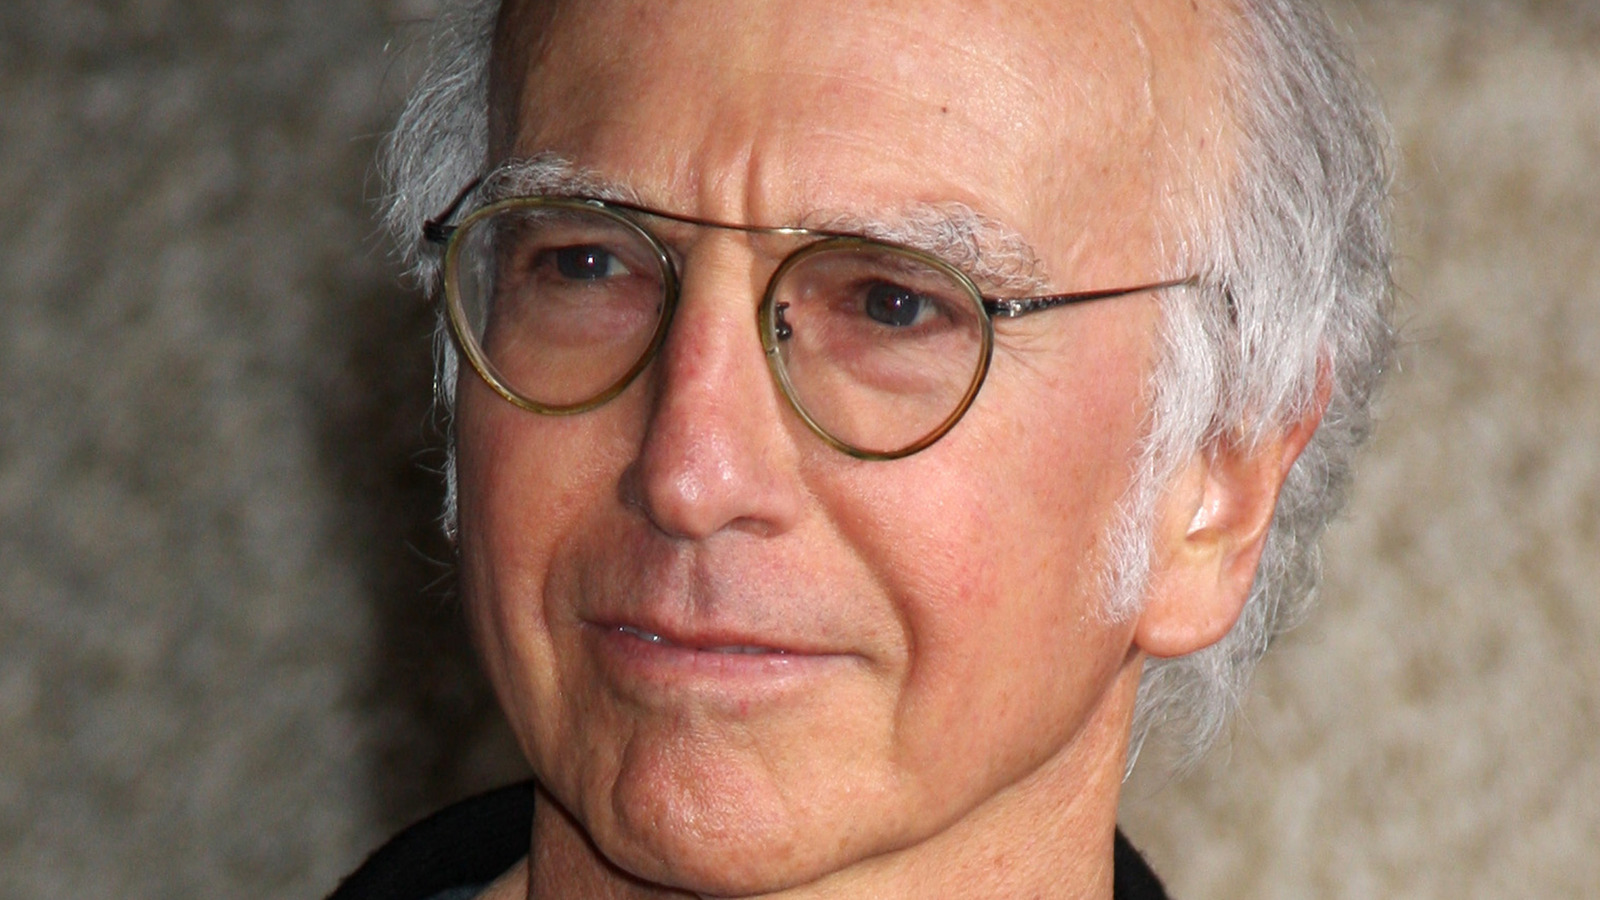 Larry David explains how Seinfeld's George Costanza wound up with